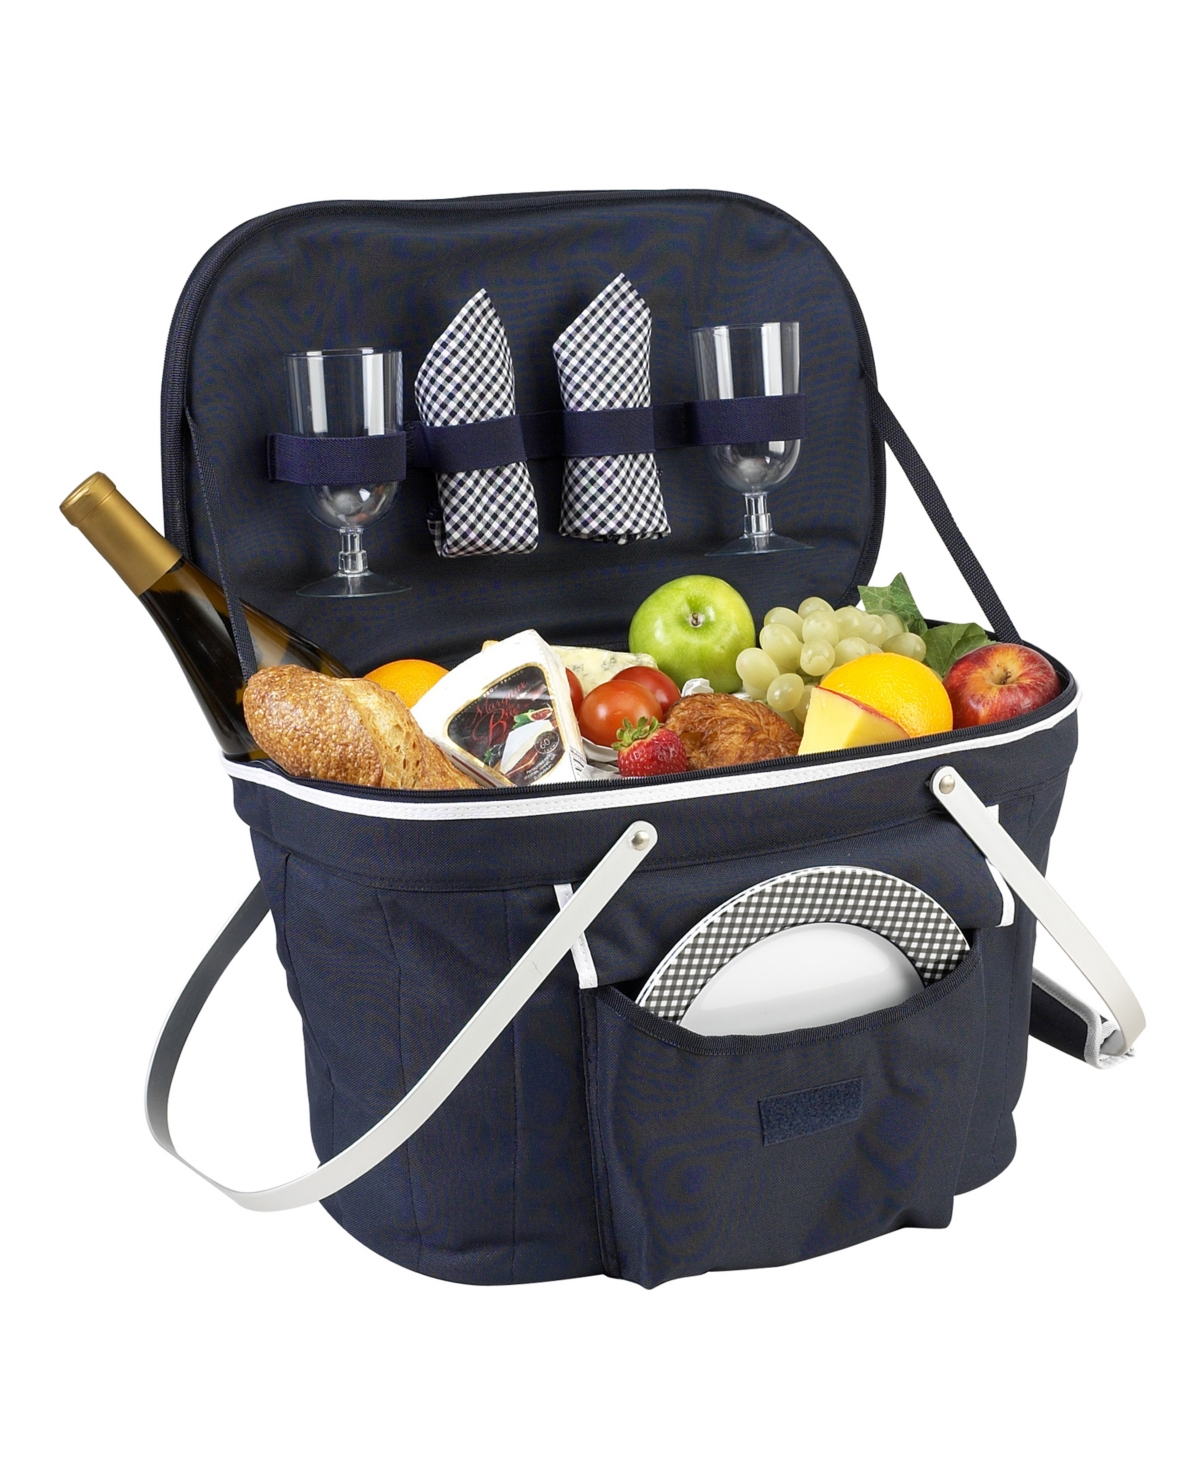 Collapsible Picnic Basket Cooler - Equipped with Service For 2 - Navy